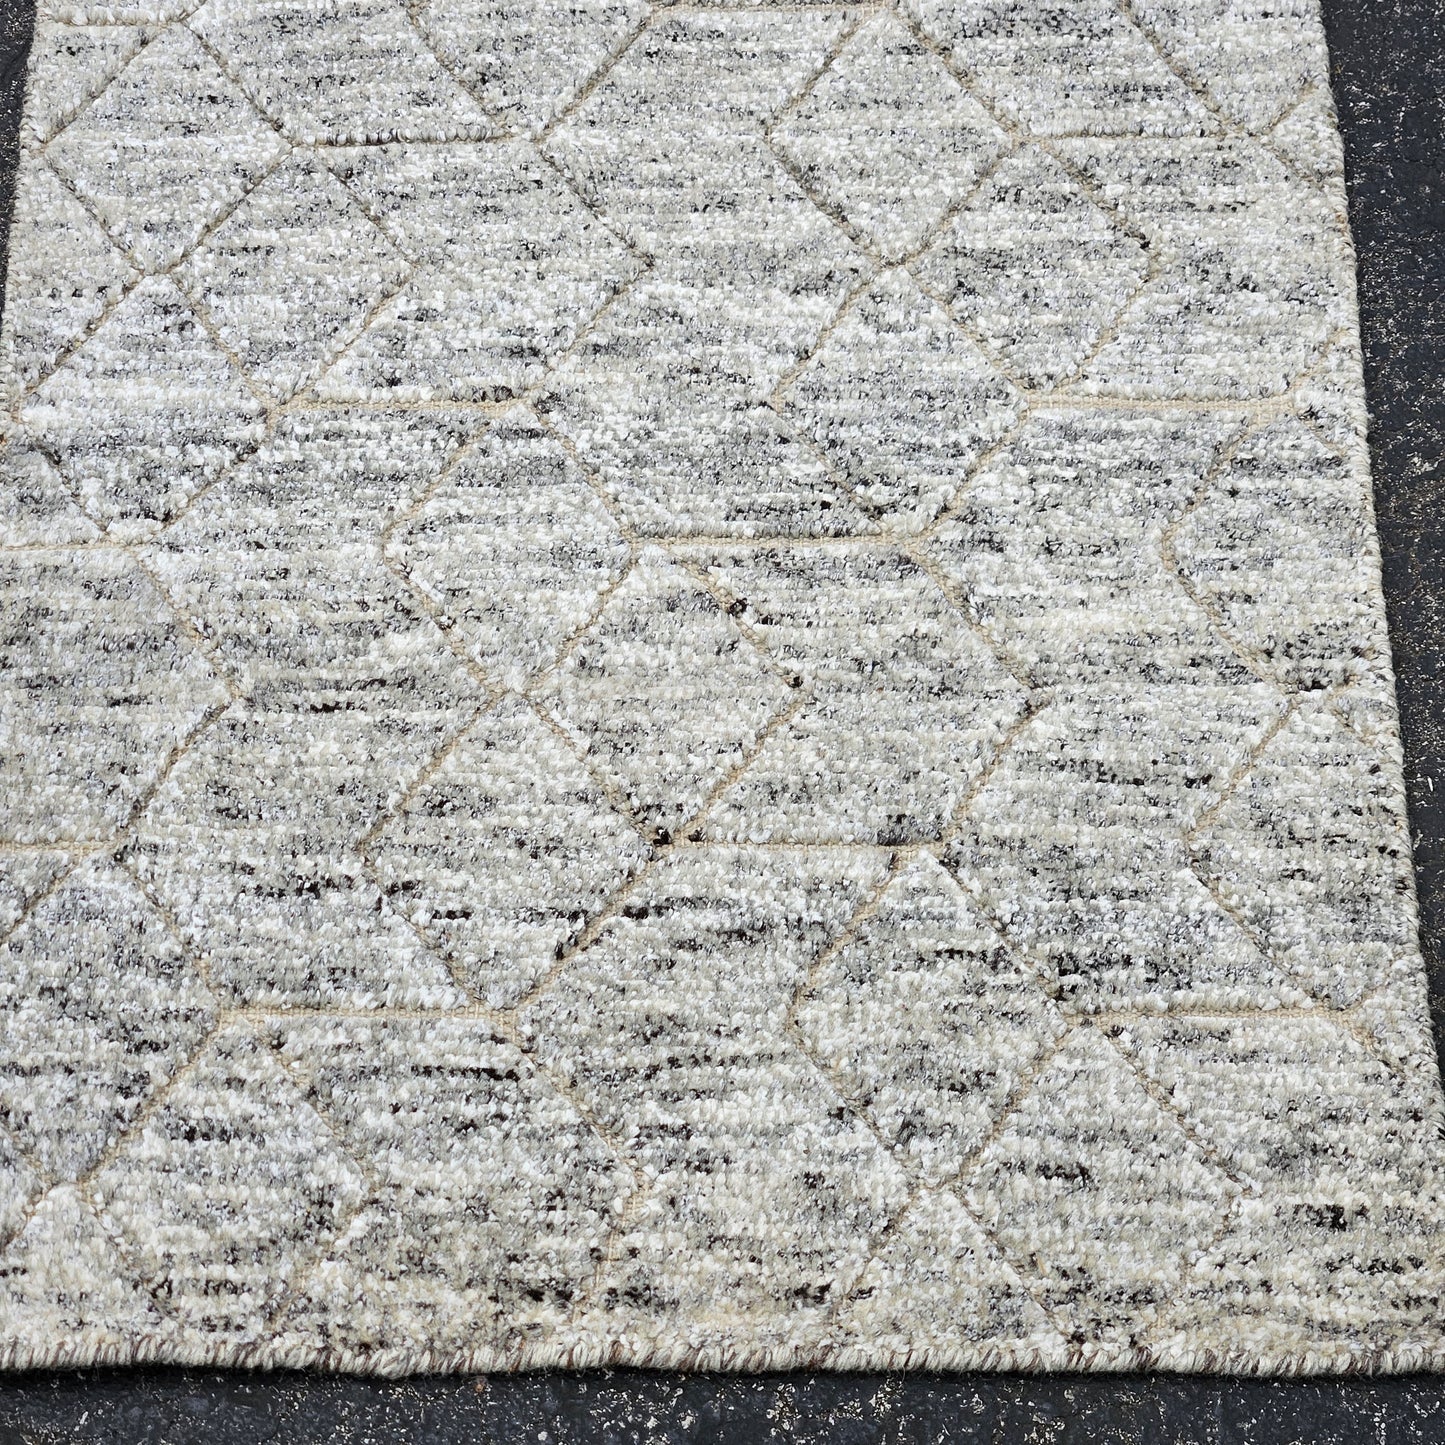 Small Hand Hooked Rug - 2' x 3'